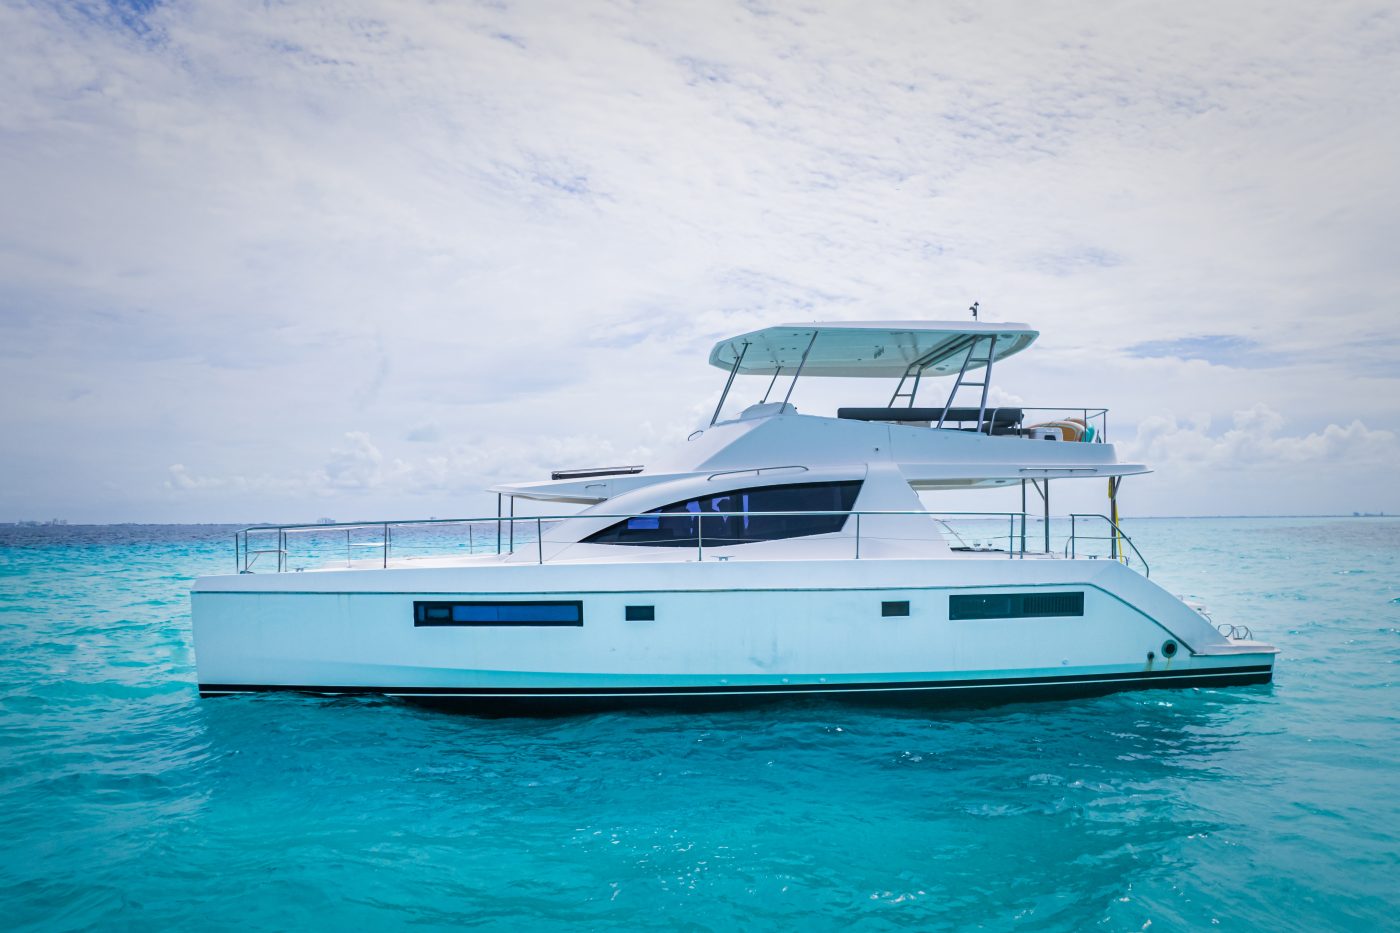 Leopard Catamaran for Luxury Yacht Charters from Cancun side